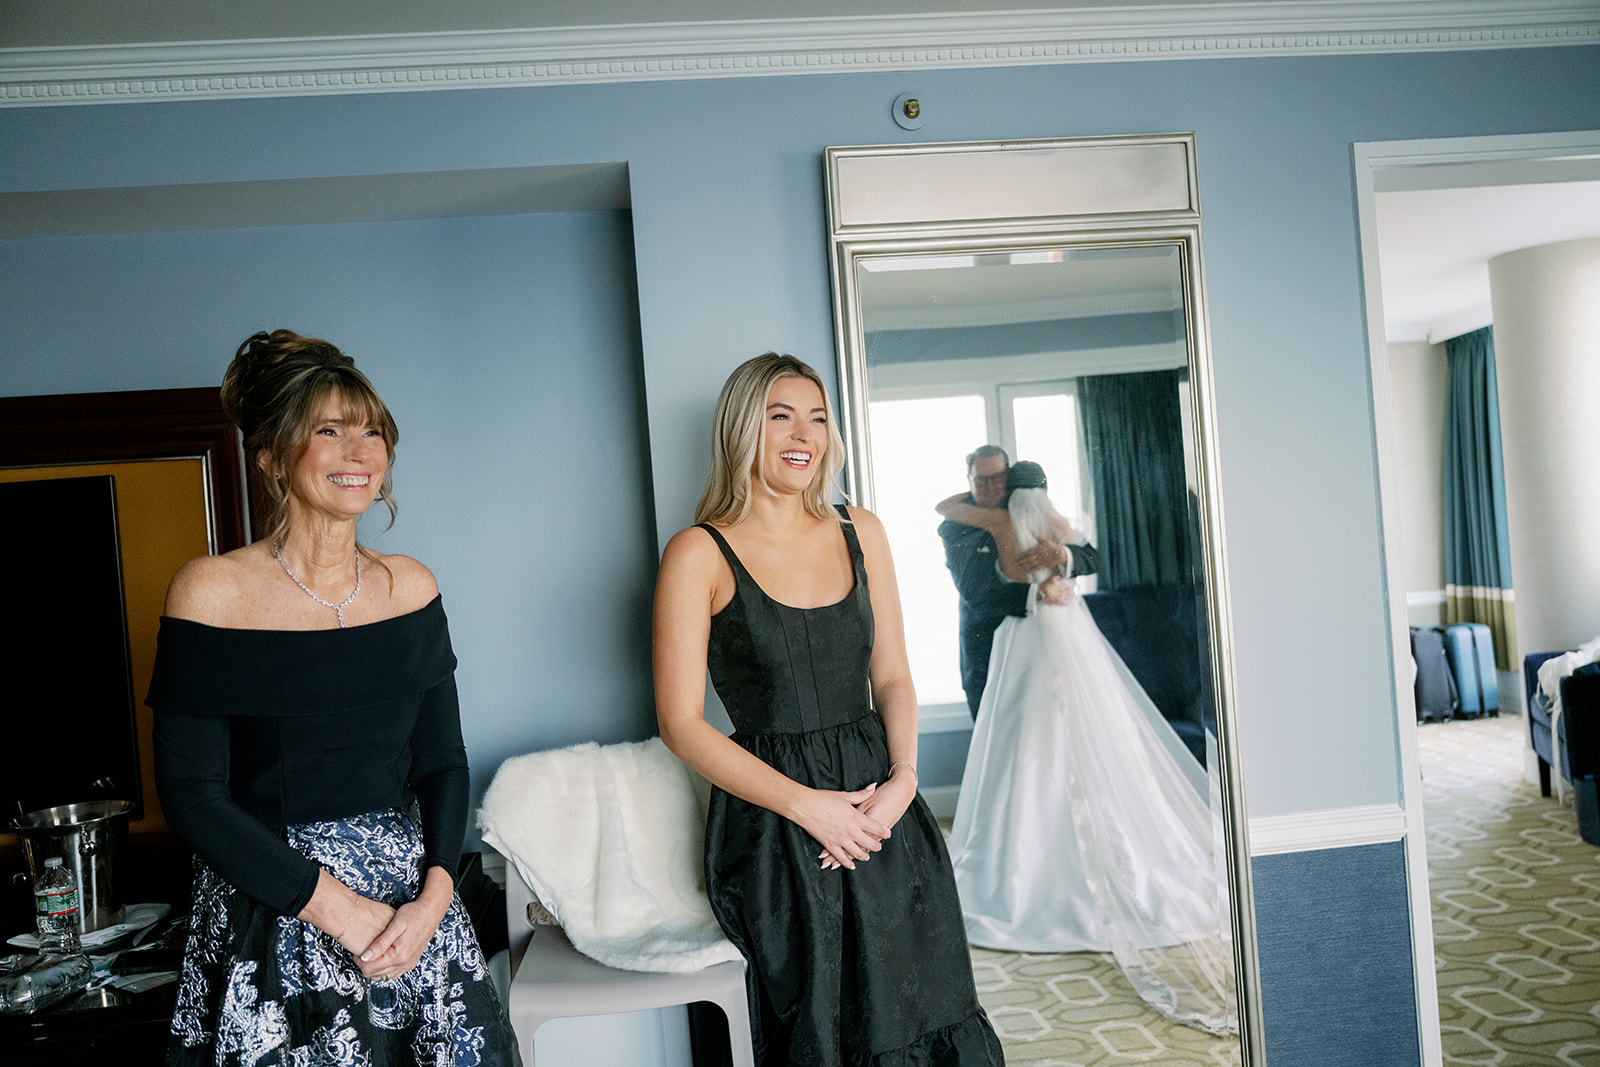 Candid reactions from the bride's mom and sister during the father-daughter first look. 